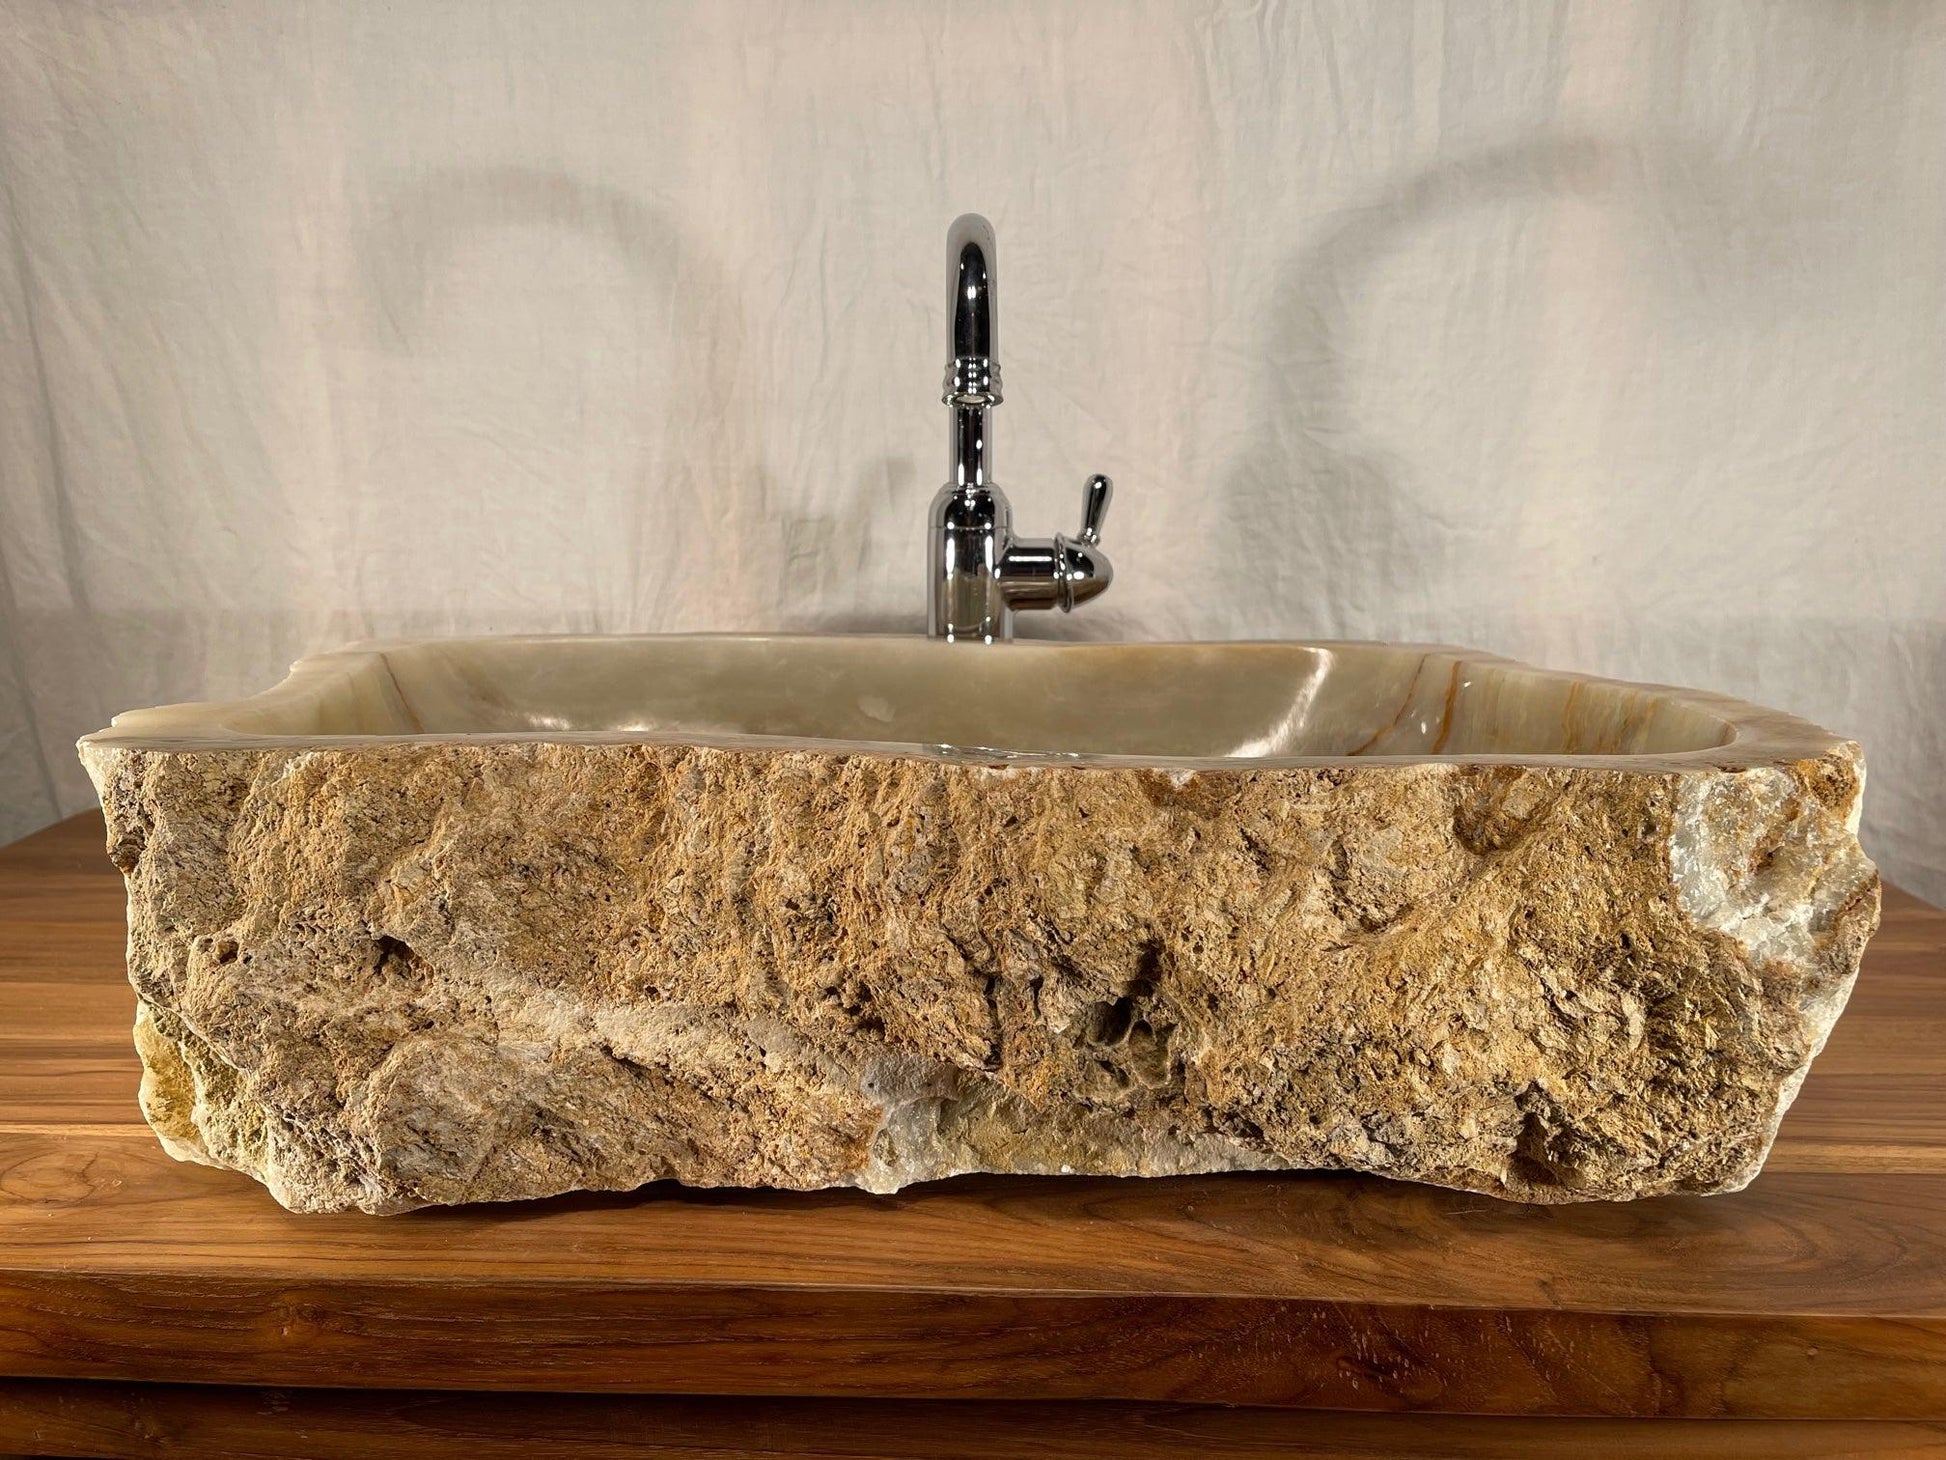 Unique Mixed Onyx With Gold Natural Stone Vessel Sink, OWG05 - Impact Imports